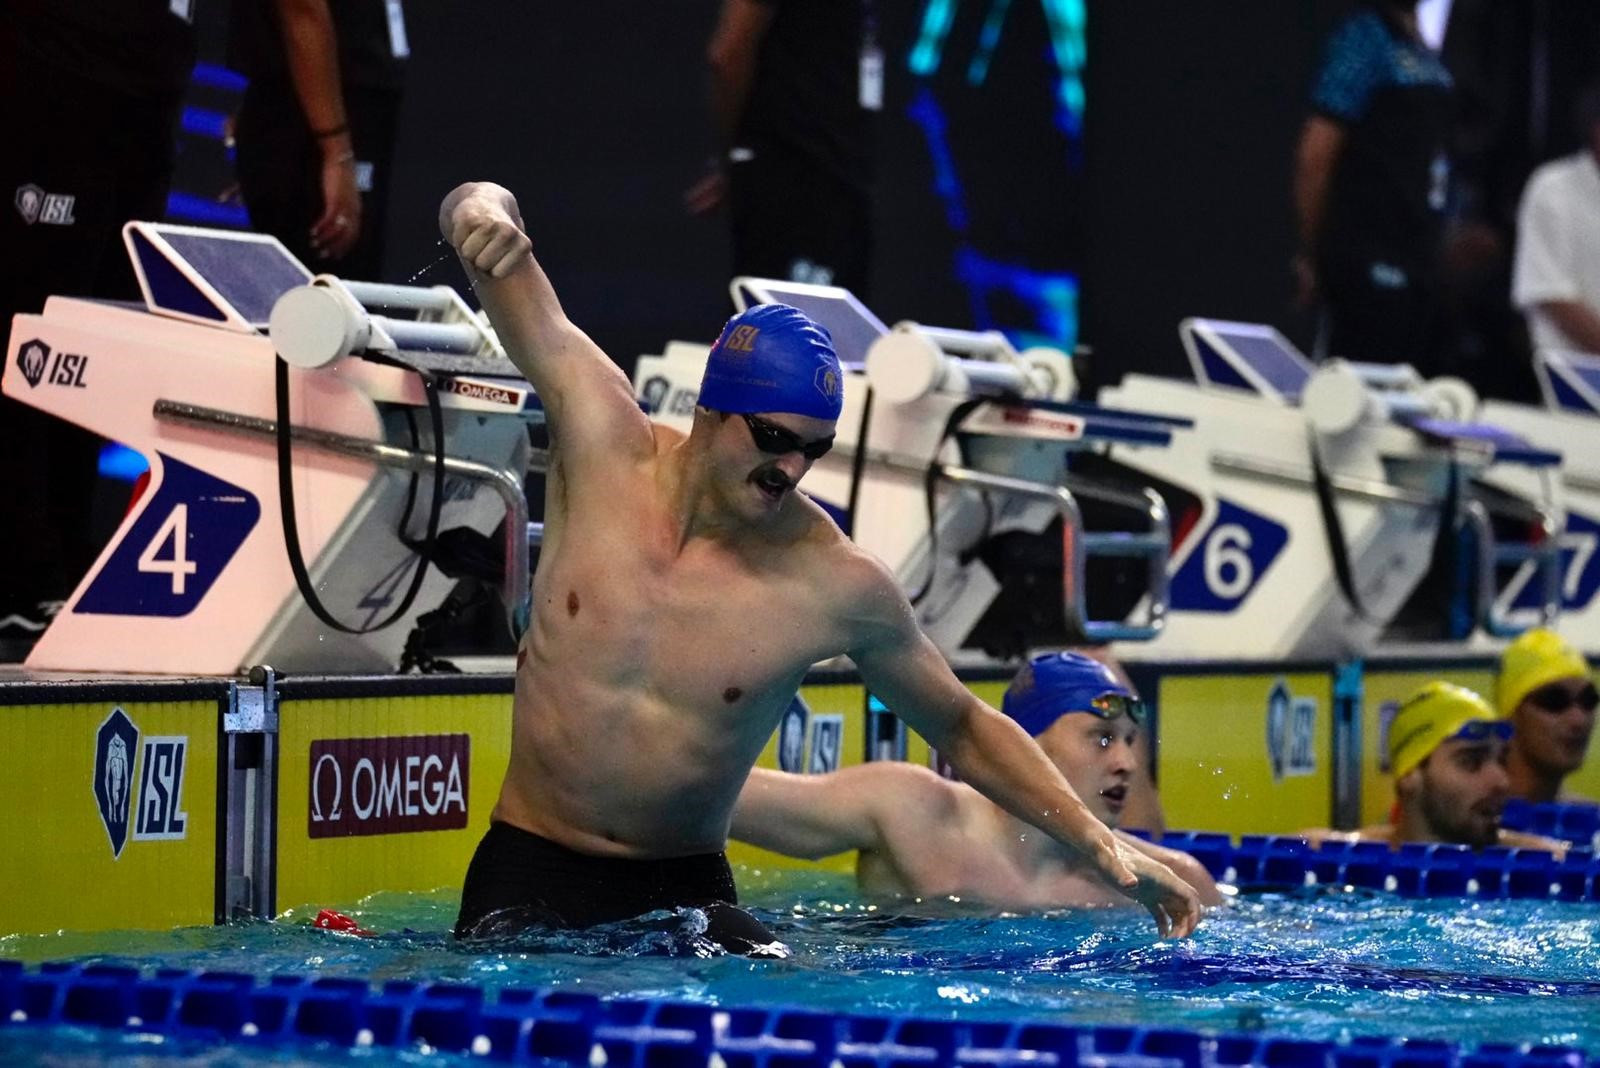 Coleman Stewart won the men's 100m backstroke in match two of the ISL in a world record time of 48.33 ©ISL